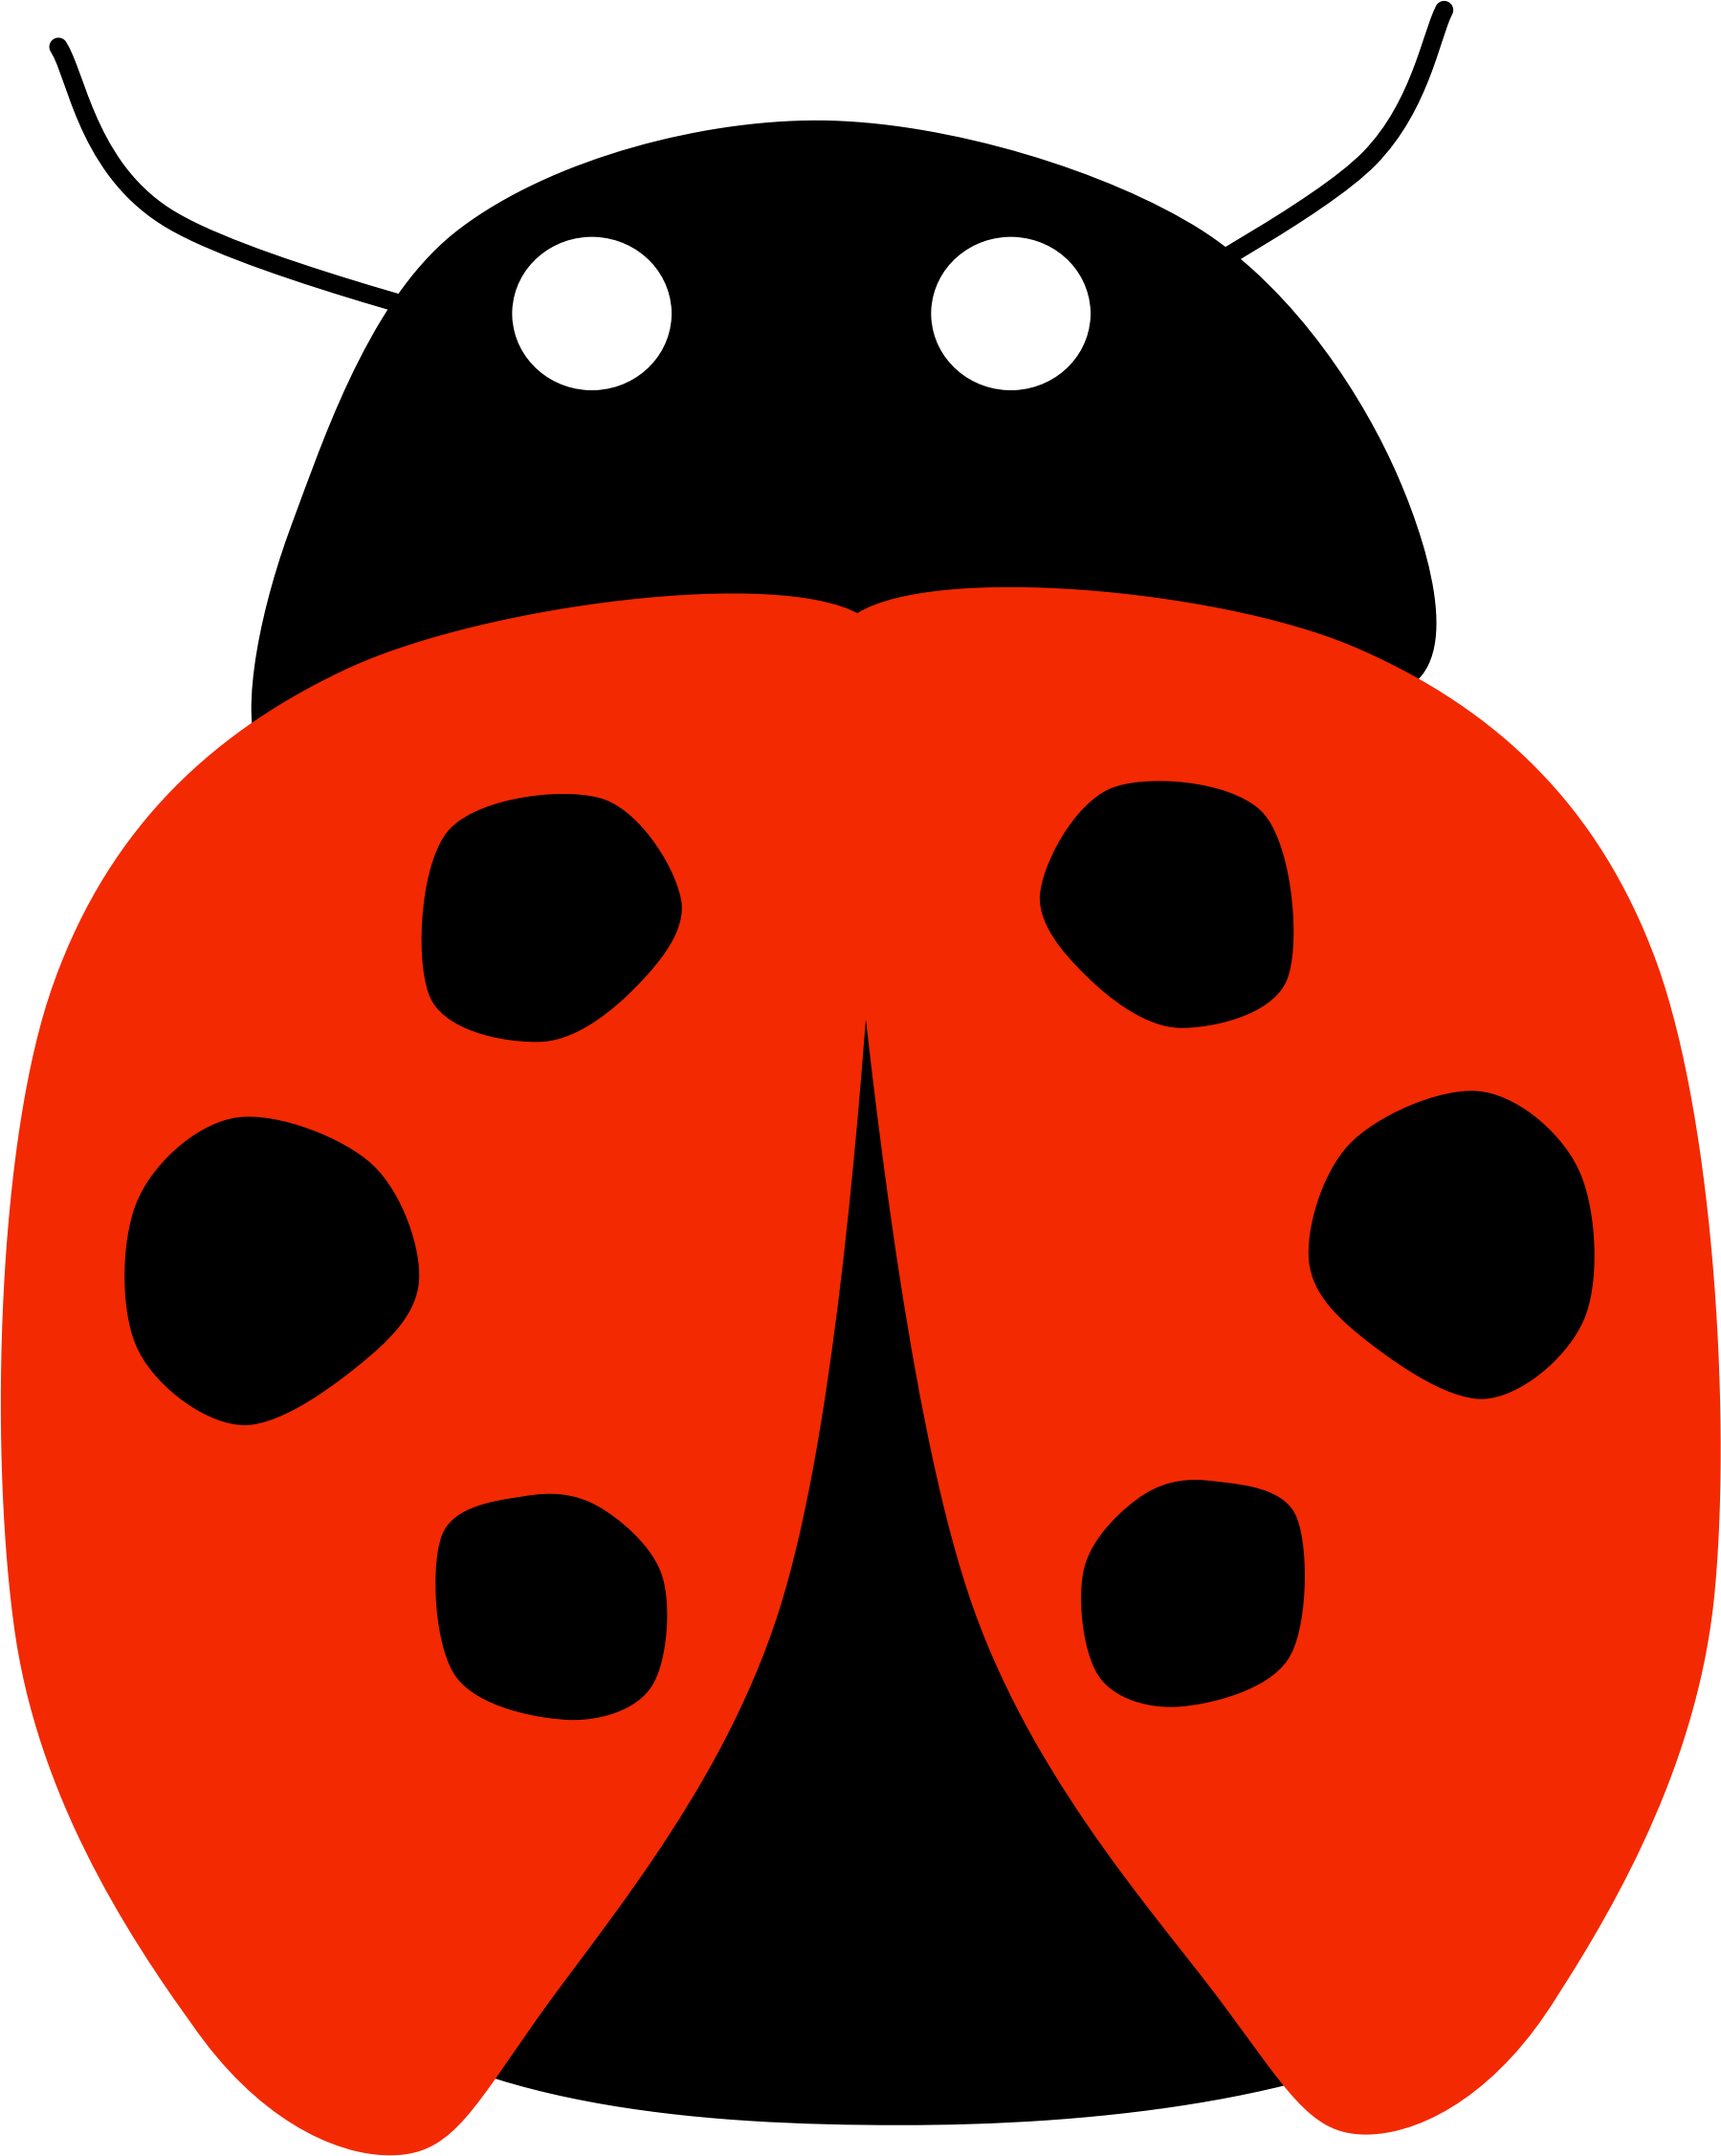 Free Lady Bug Transparent Background Ladybug Clipart 1799x2254 Png Clipart Download